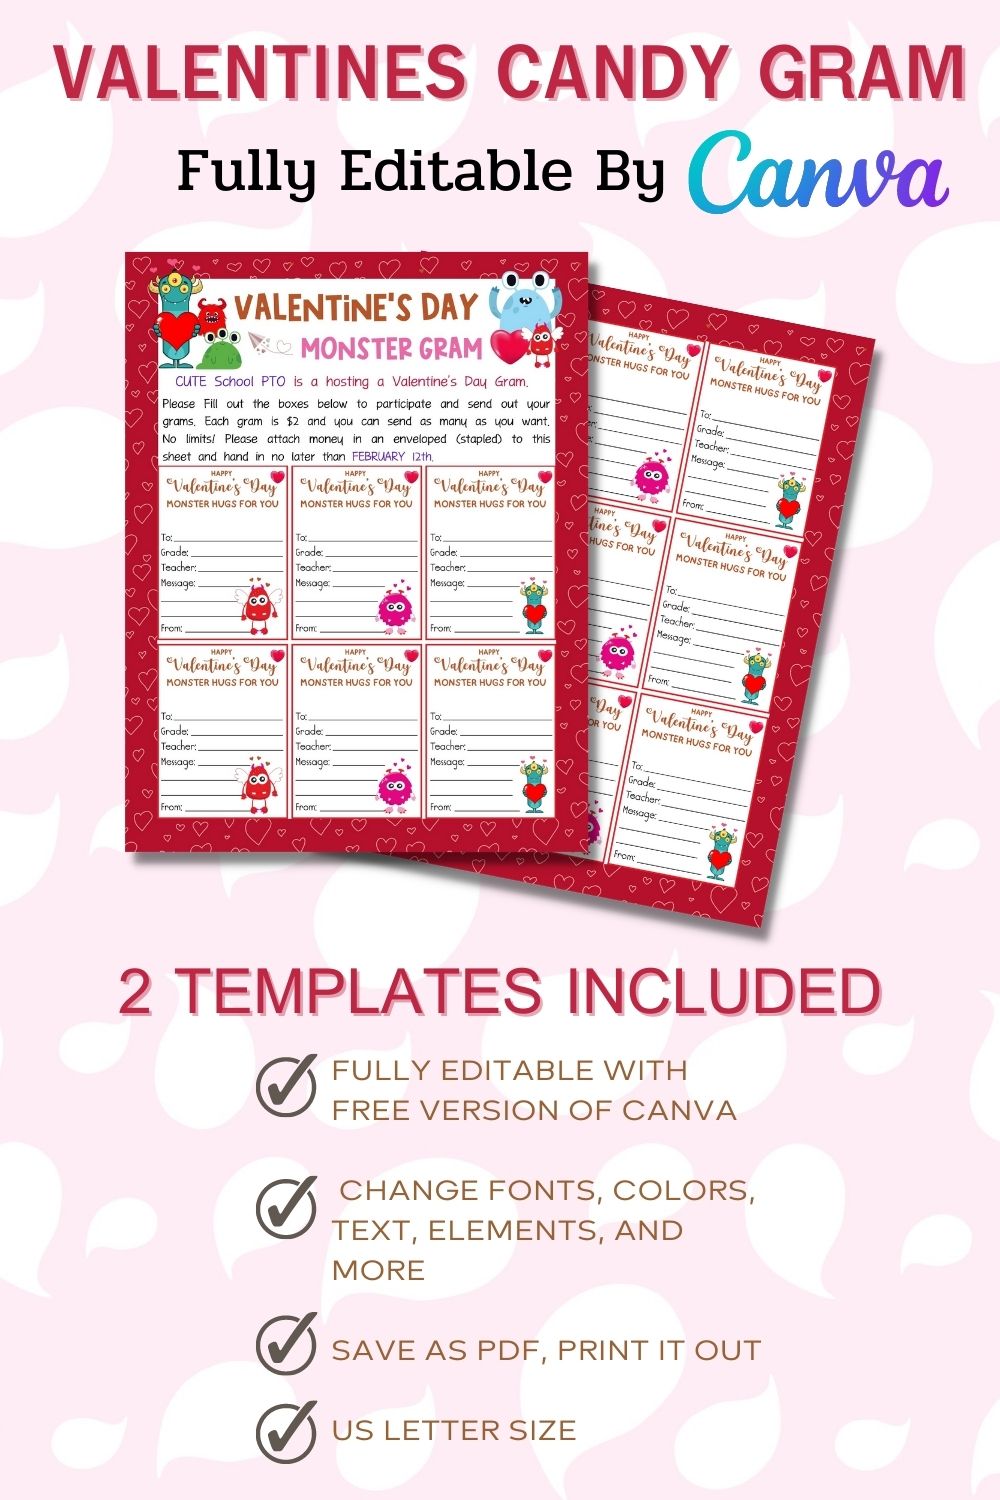 VALENTINES CANDY GRAM pinterest preview image.